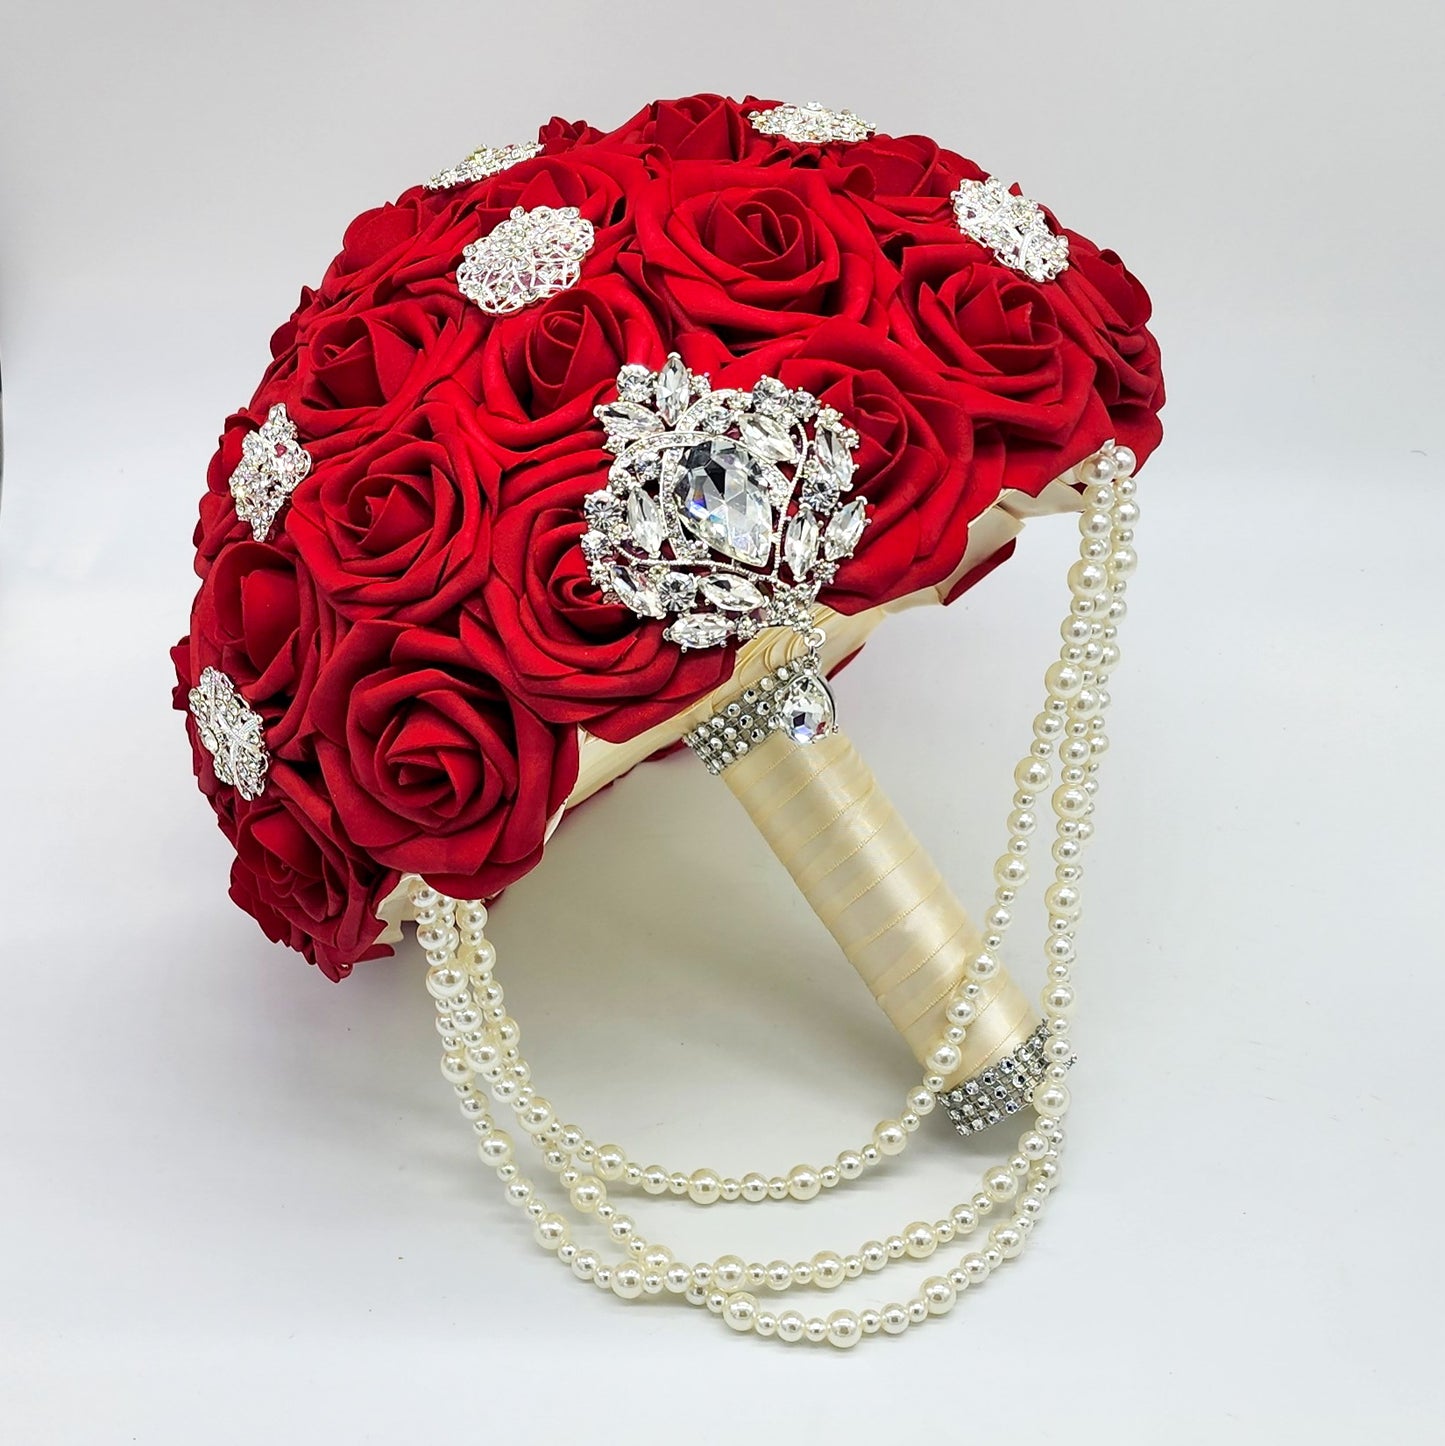 Red and Ivory Bridal Bouquet With Cascading Pearls